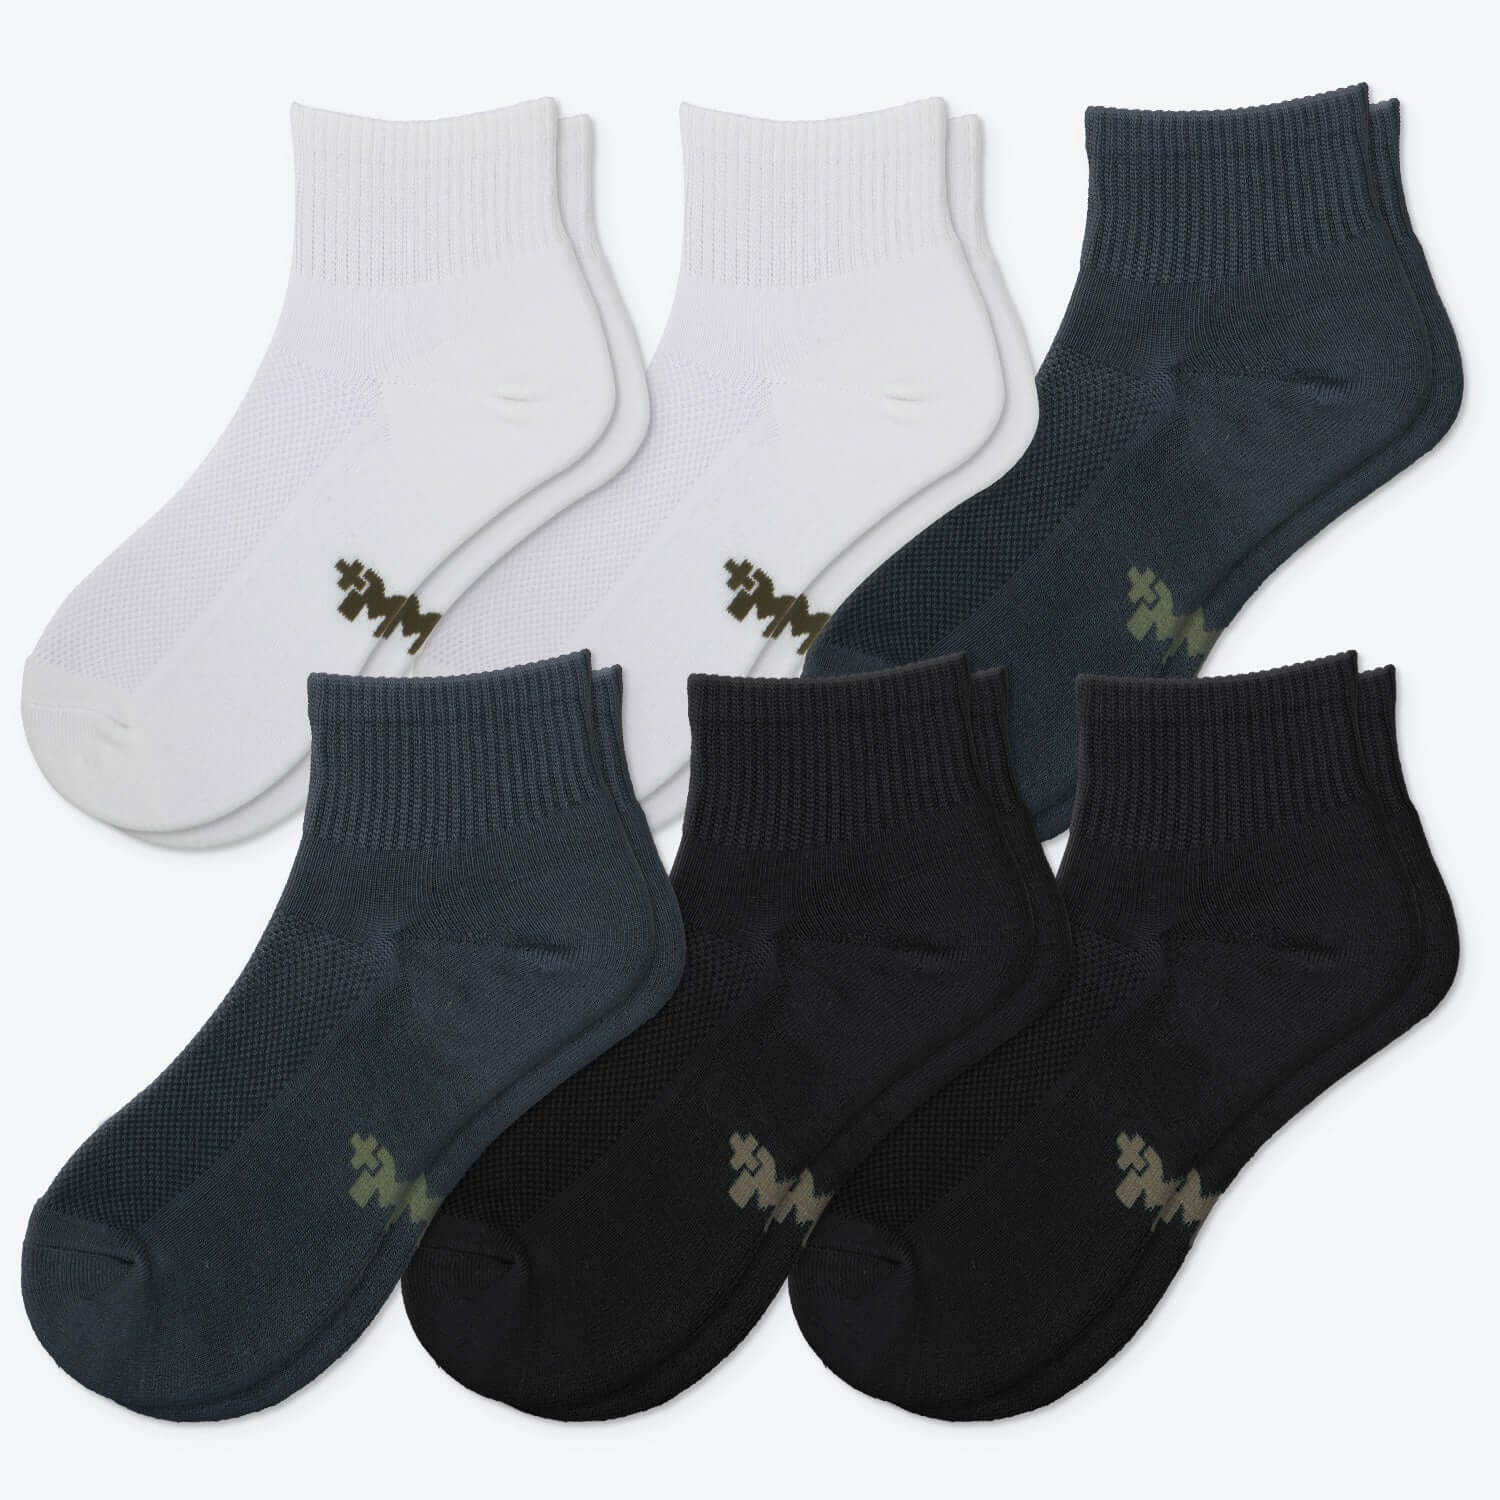 Smell Control Rayon from Bamboo Ankle Socks Cushioned, 6 Pairs